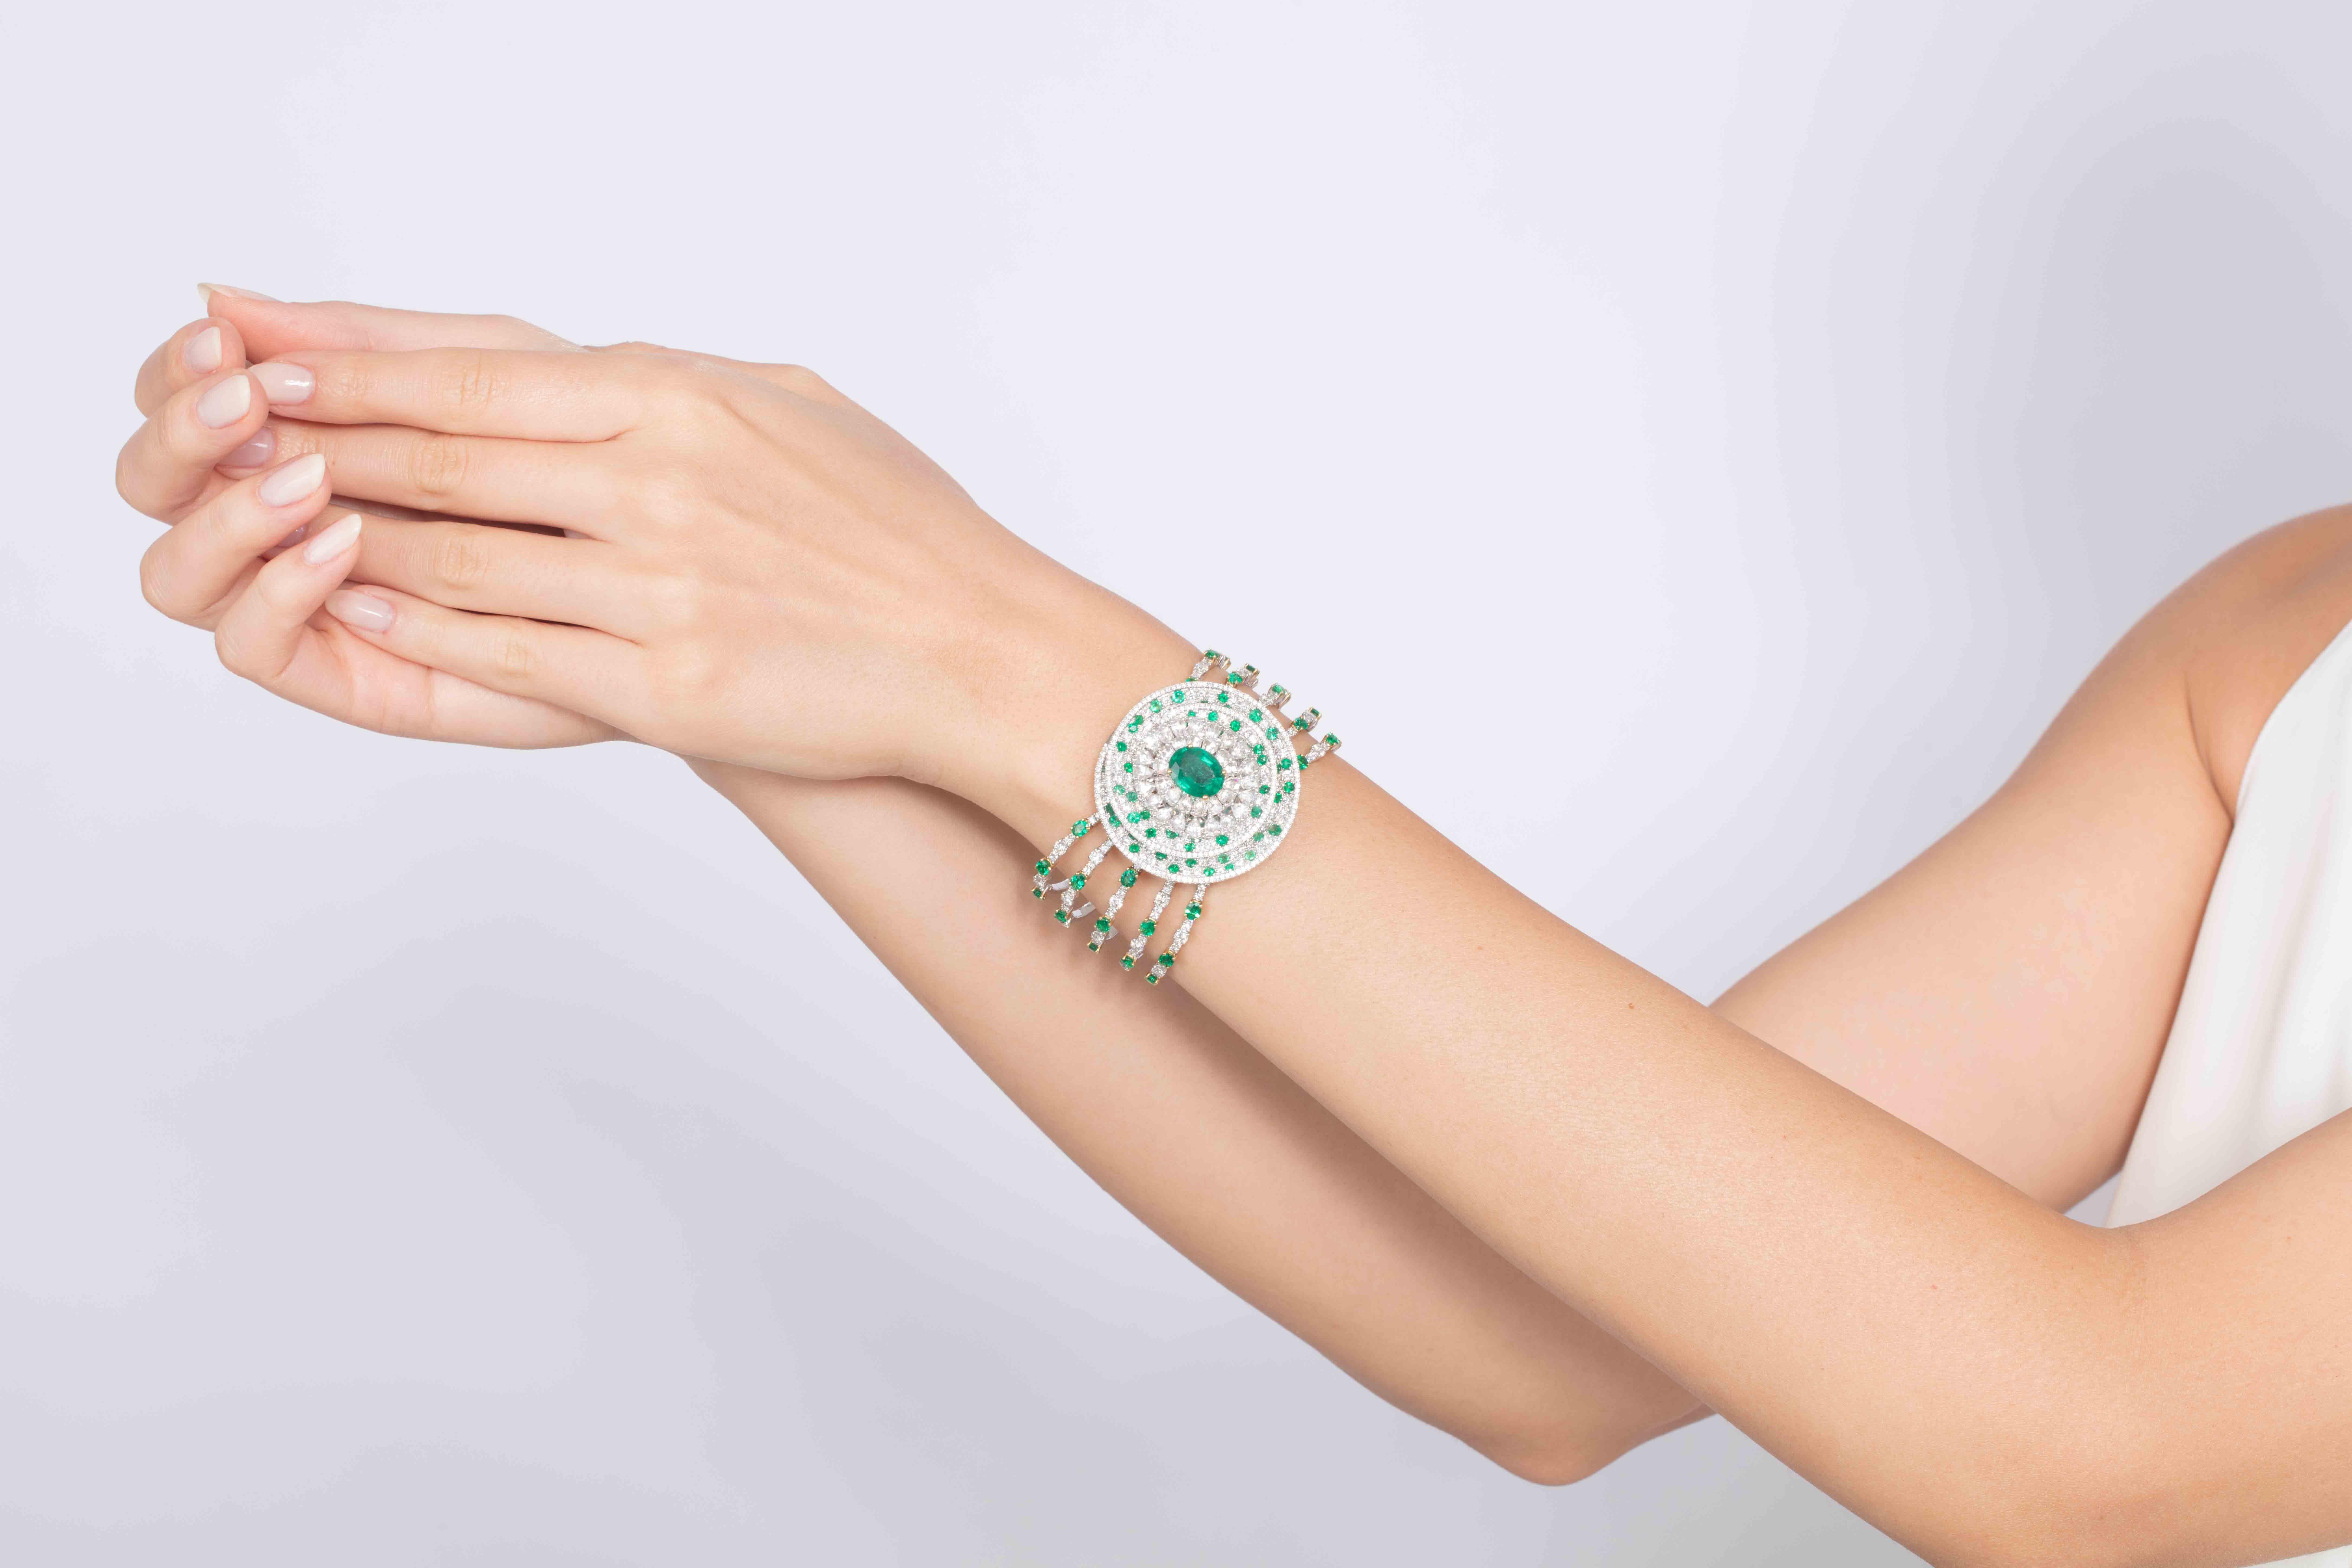 Every angle of Butani's cuff showcases the brand's attention to detail.  This stunning cuff bangle is handmade from 18 karat white and yellow gold and is centered with a striking 3.86 carat oval emerald illuminated by rose-cut and brilliant-cut